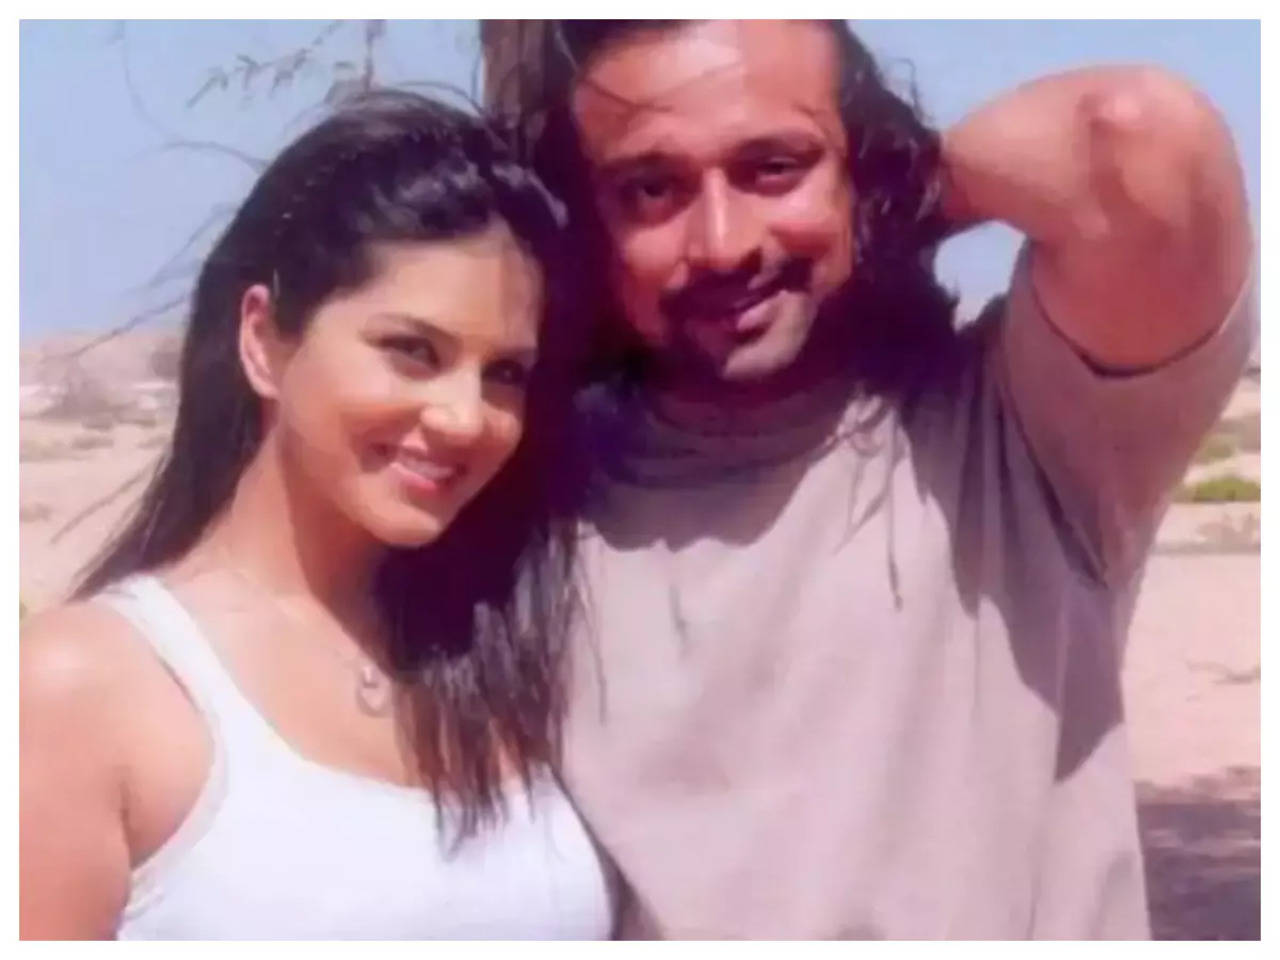 Xxx Video Sunny Lione - Did you know? Sunny Leone's first on-screen pair was a Malayali! |  Malayalam Movie News - Times of India